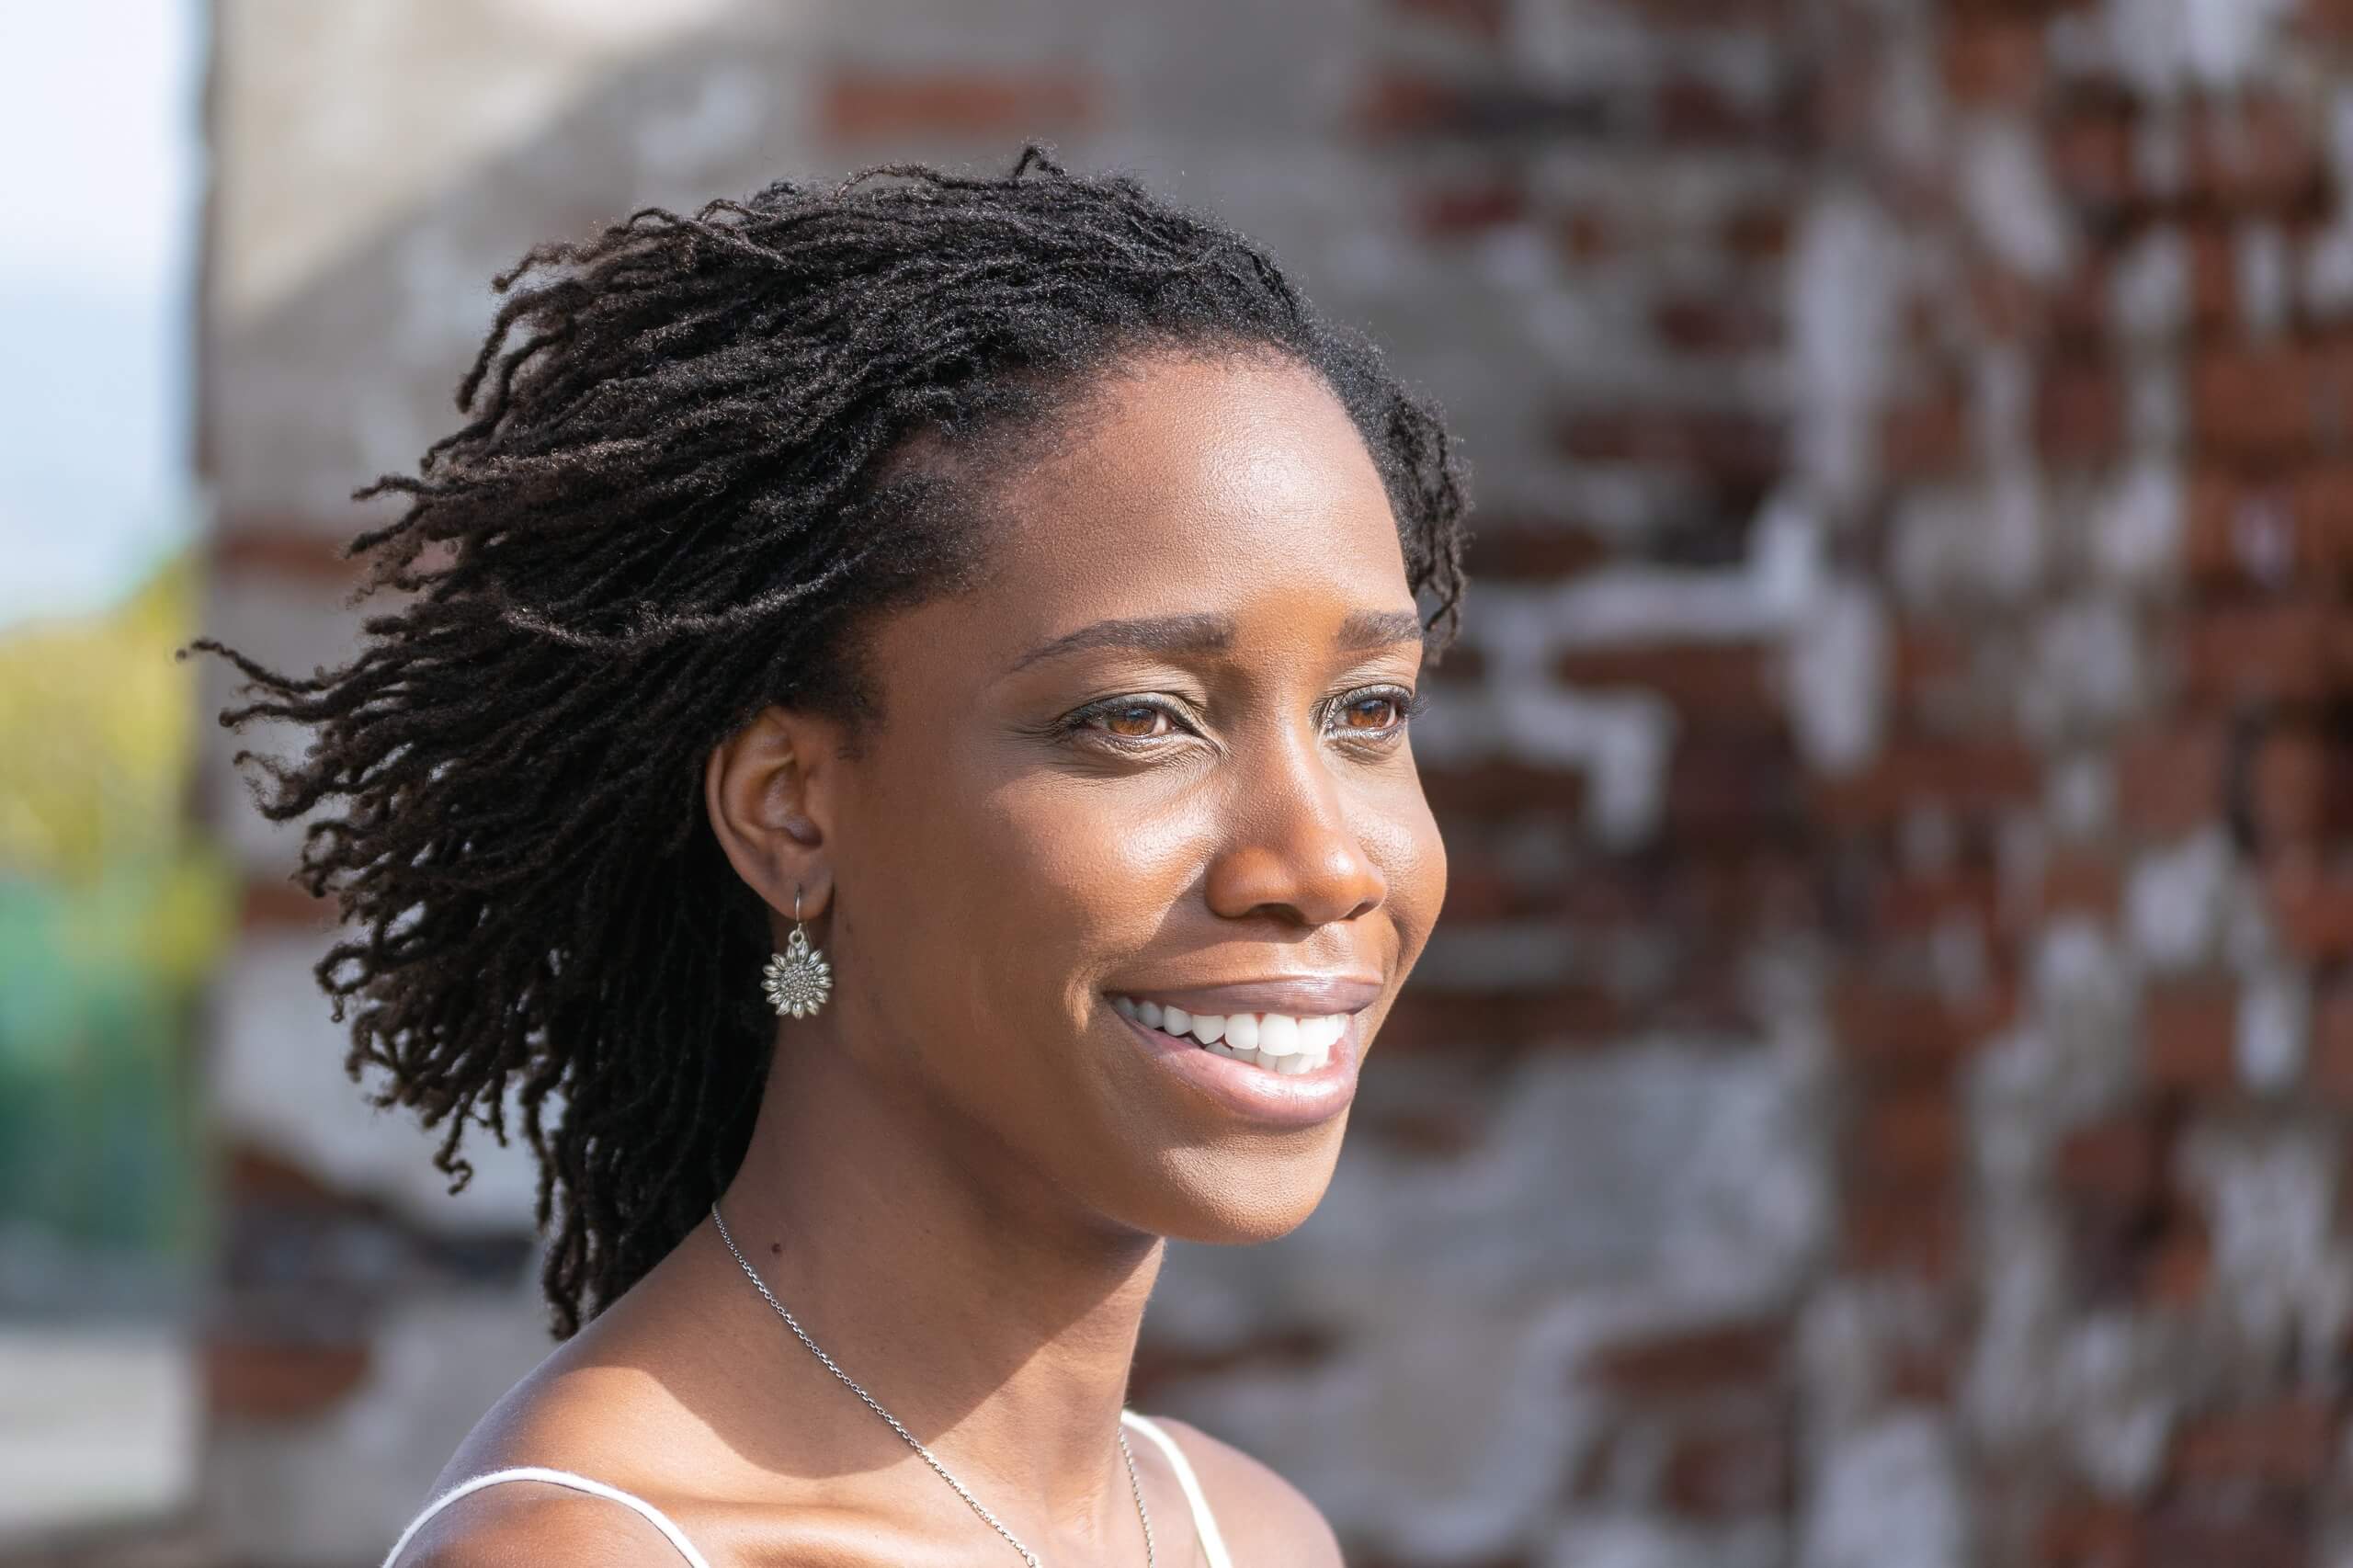 woman with microlocs hairstyle smiling